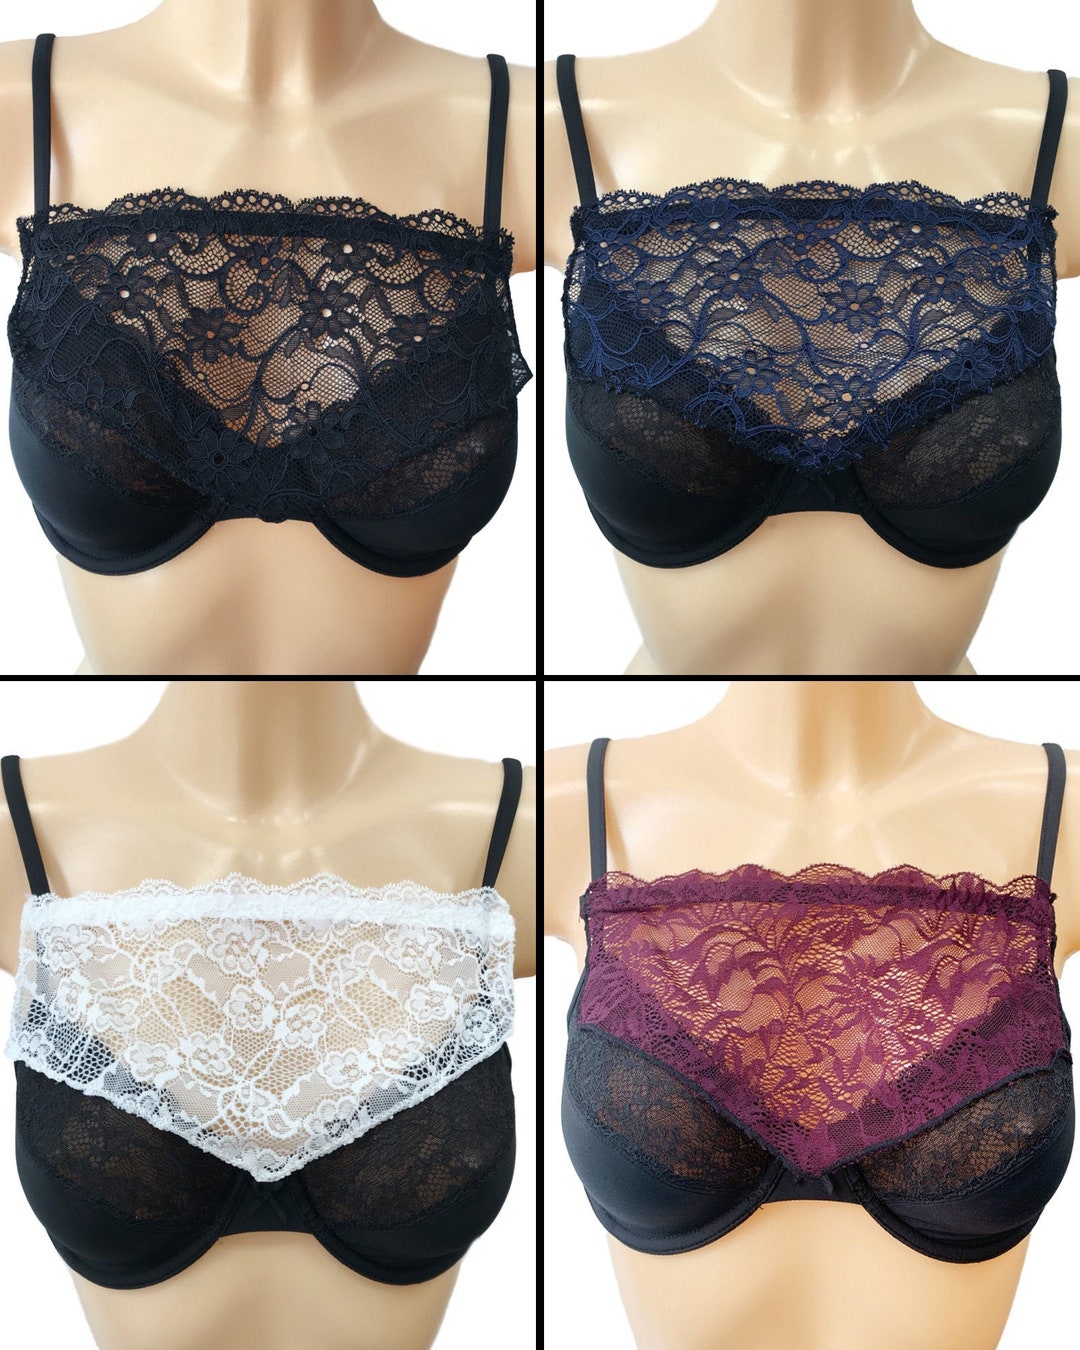 14 COLORS WOMEN'S Lace Clip-on Mock Camisole Bra Insert Overlay